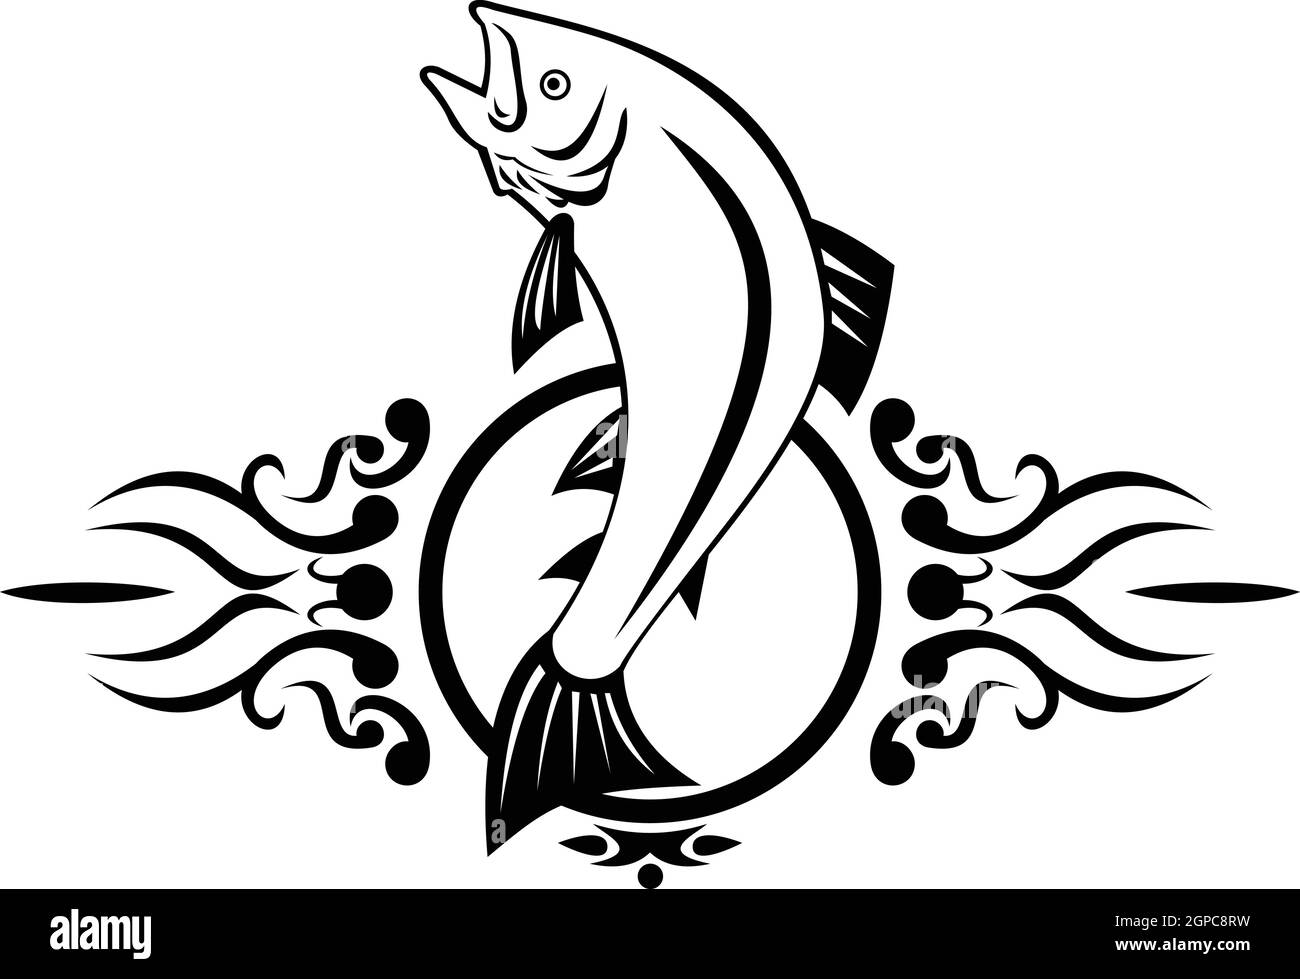 Illustration of a lake trout fish jumping up done in tribal tattoo style on isolated white background in black and white retro style. Stock Vector